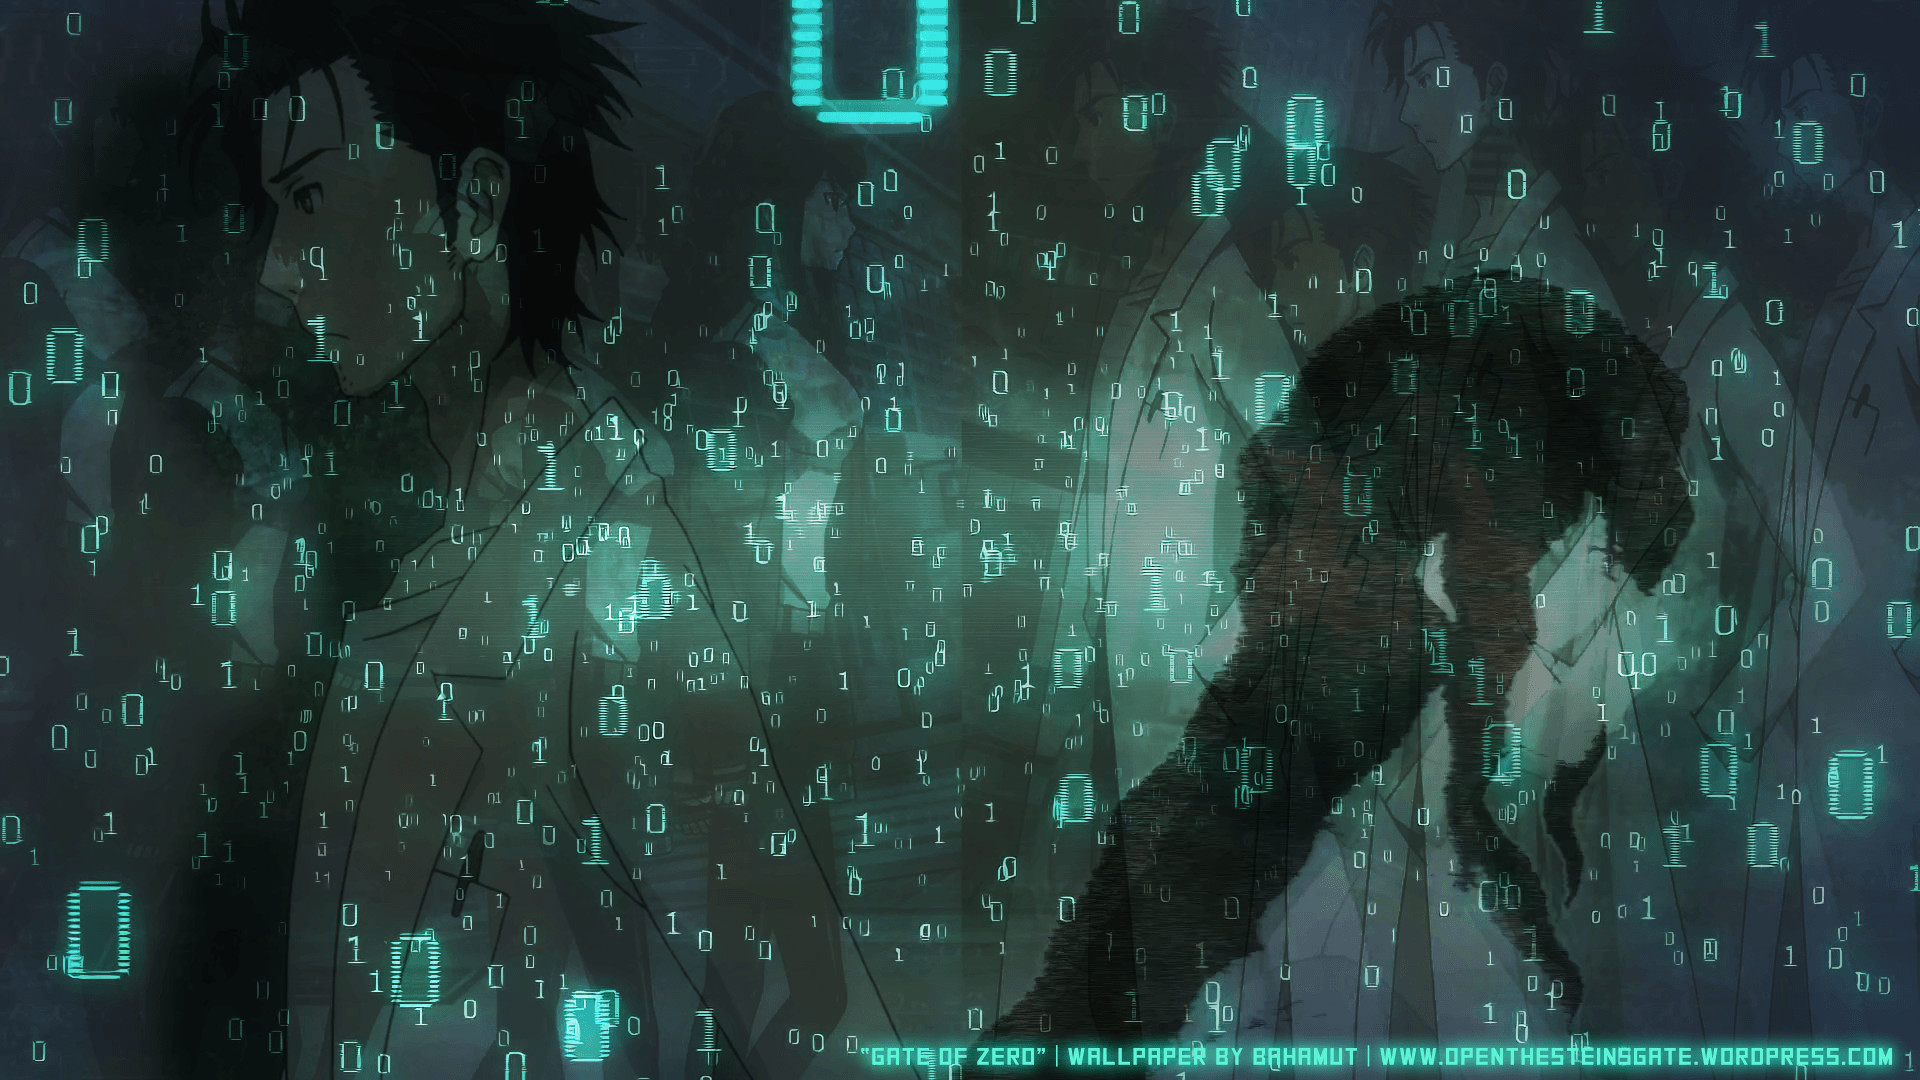 Gate of Zero" a wallpaper that I made inspired by the Steins;Gate